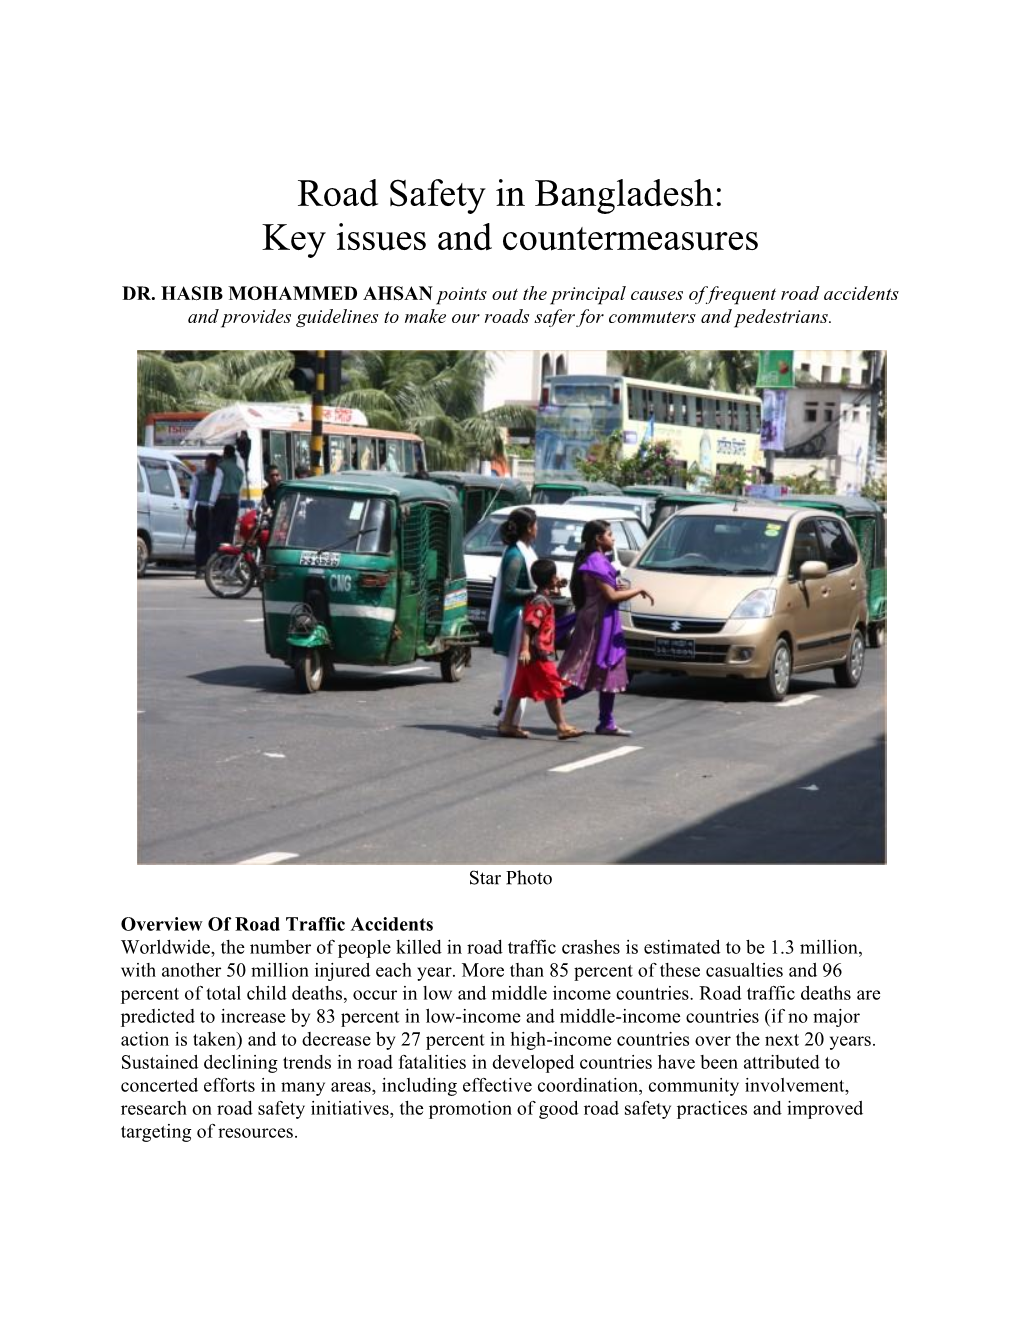 Road Safety in Bangladesh: Key Issues and Countermeasures